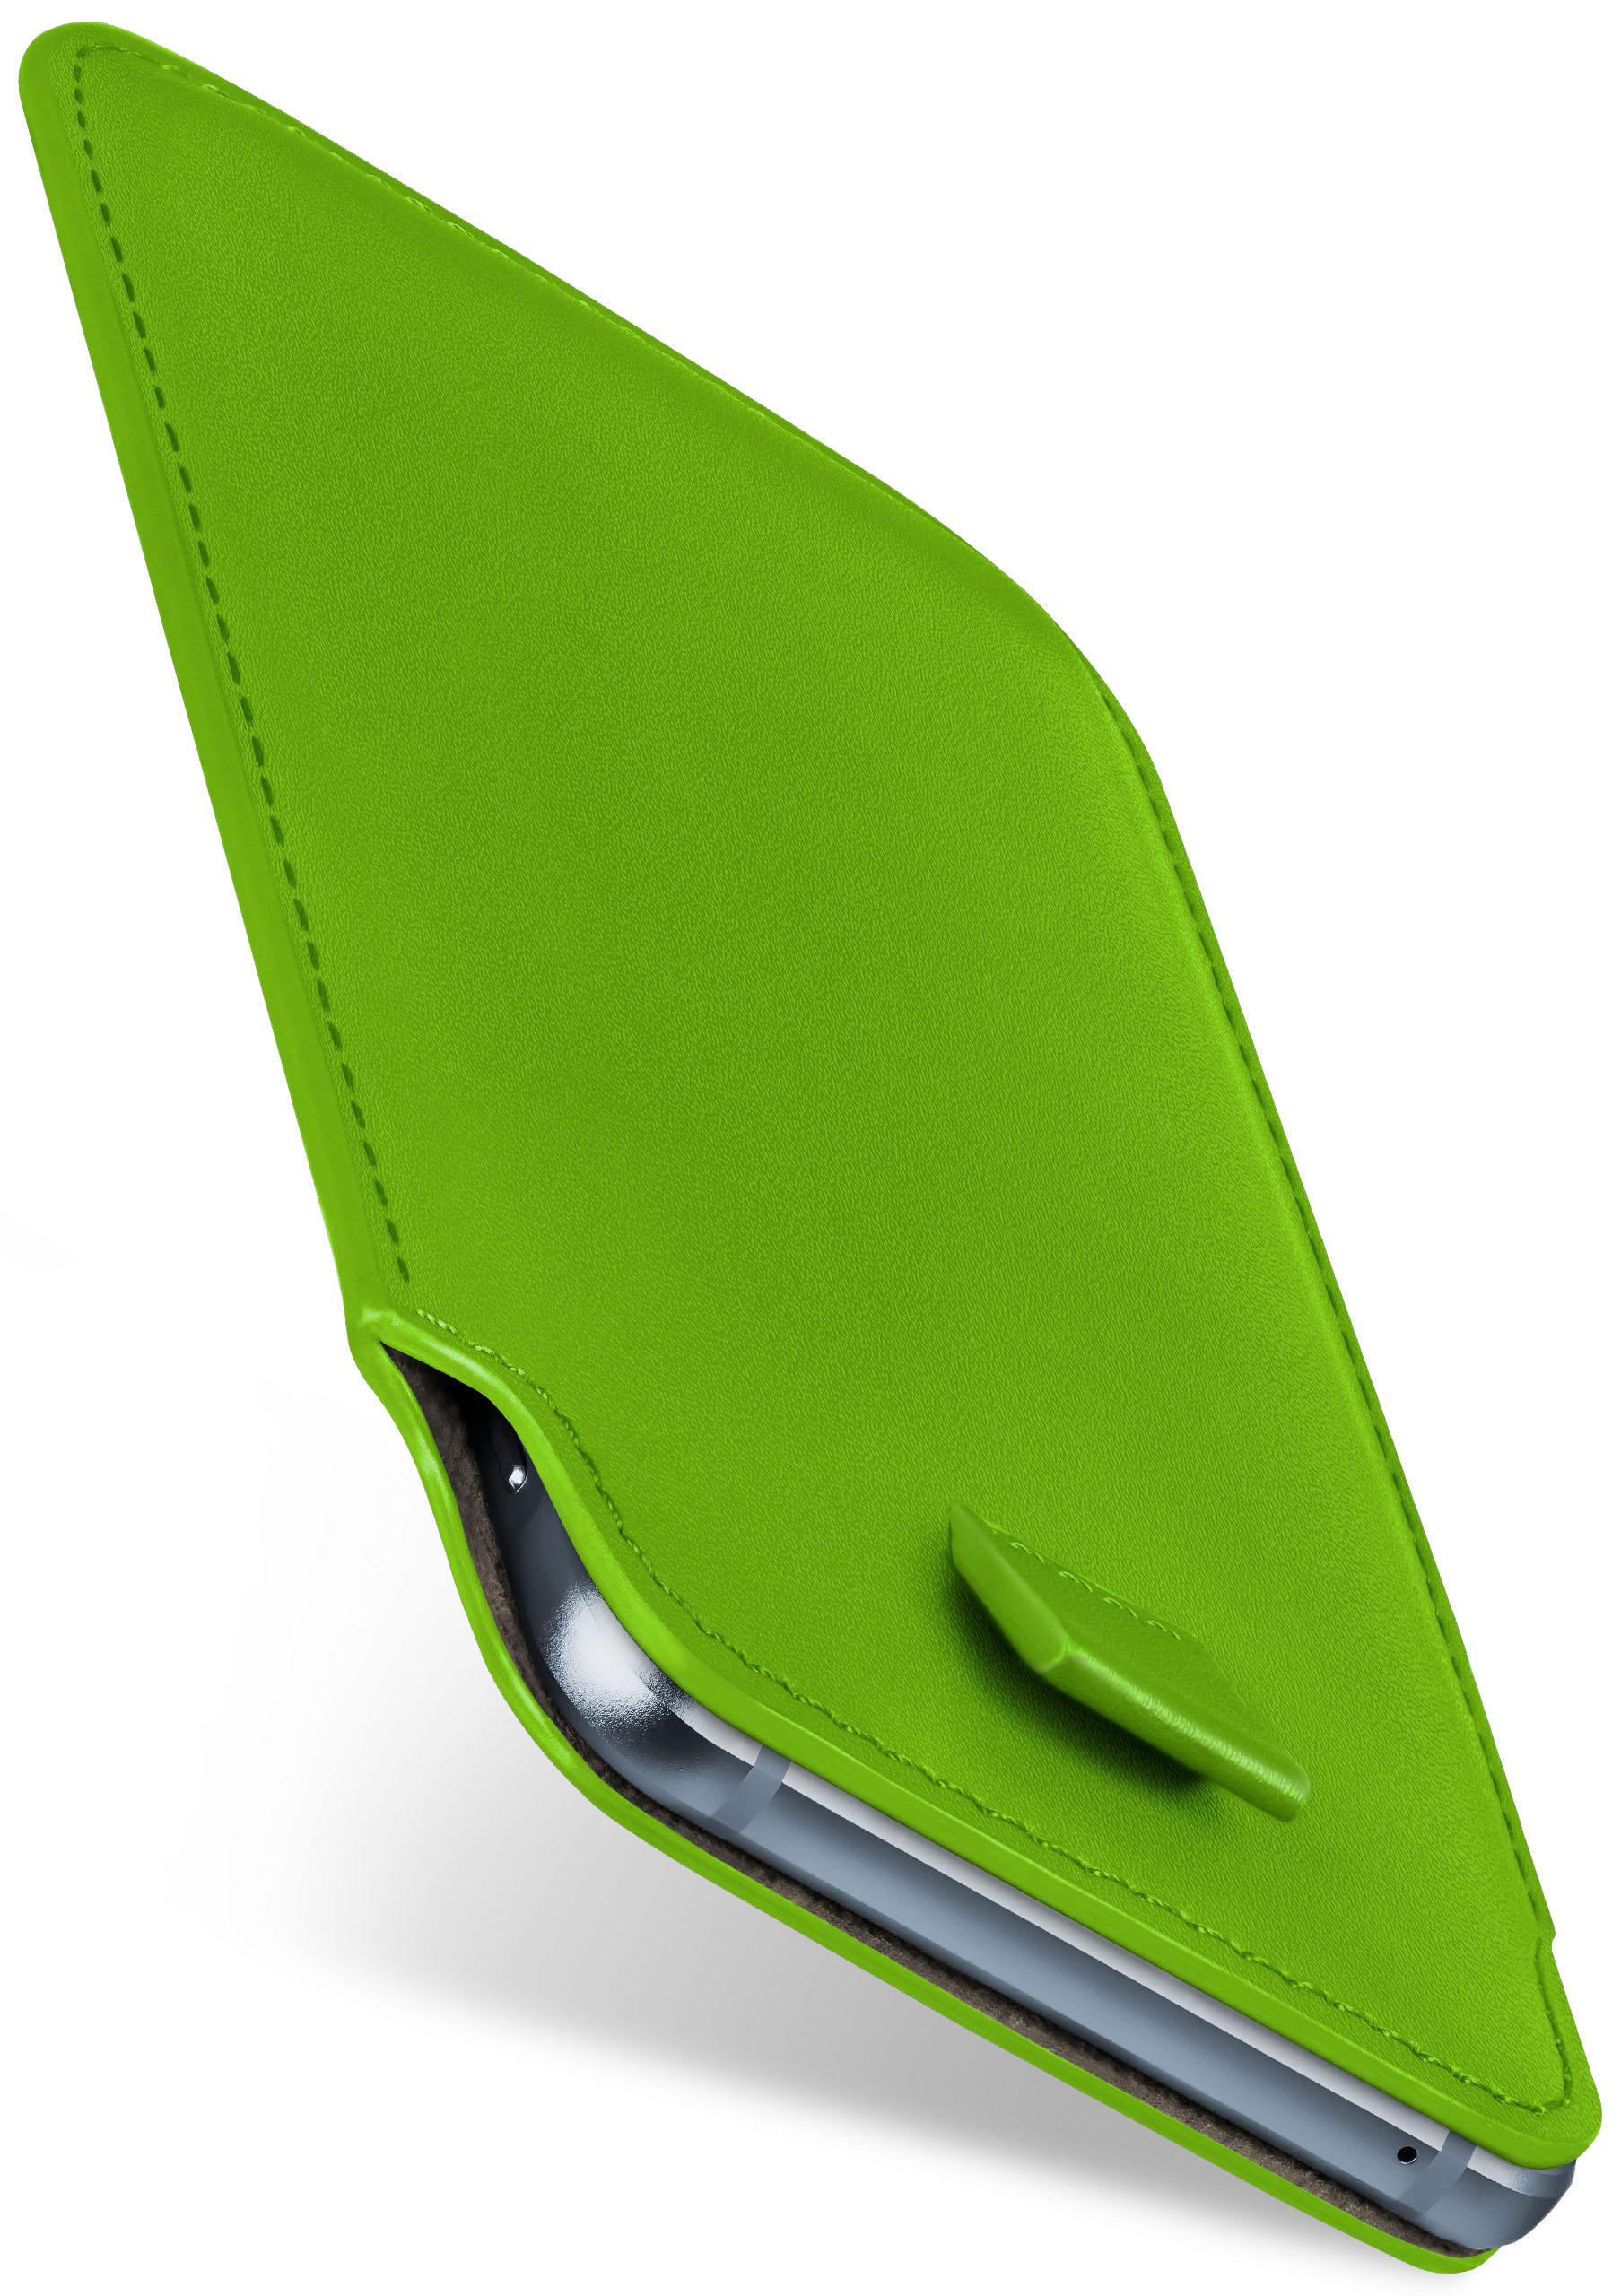 Case, Compact, Lime-Green MOEX XZ1 Sony, Full Xperia Slide Cover,